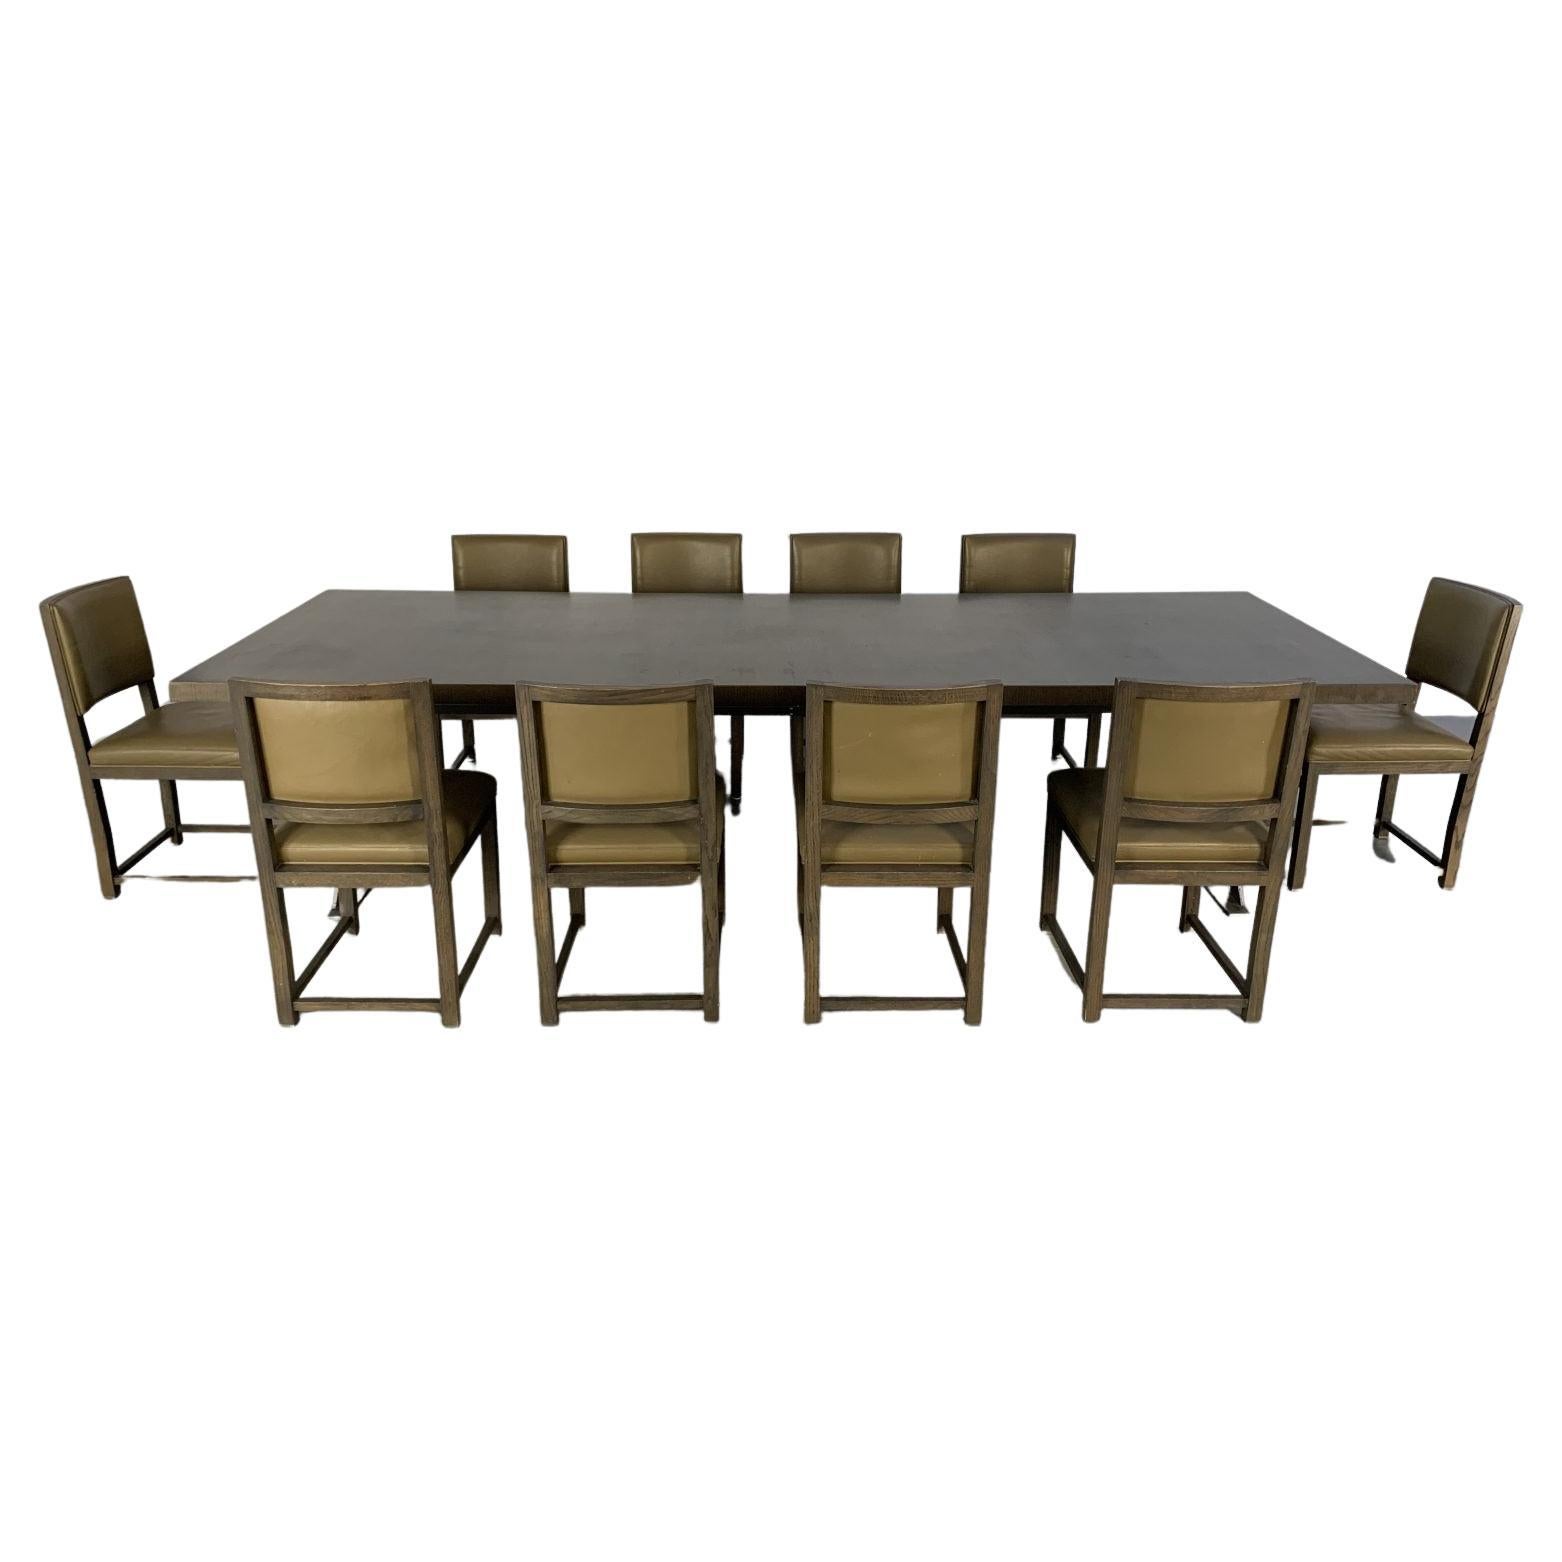 Sublime Huge B&B Italia “Max” Dining Table & 10 “Maxalto” Dining Chairs in Grey For Sale